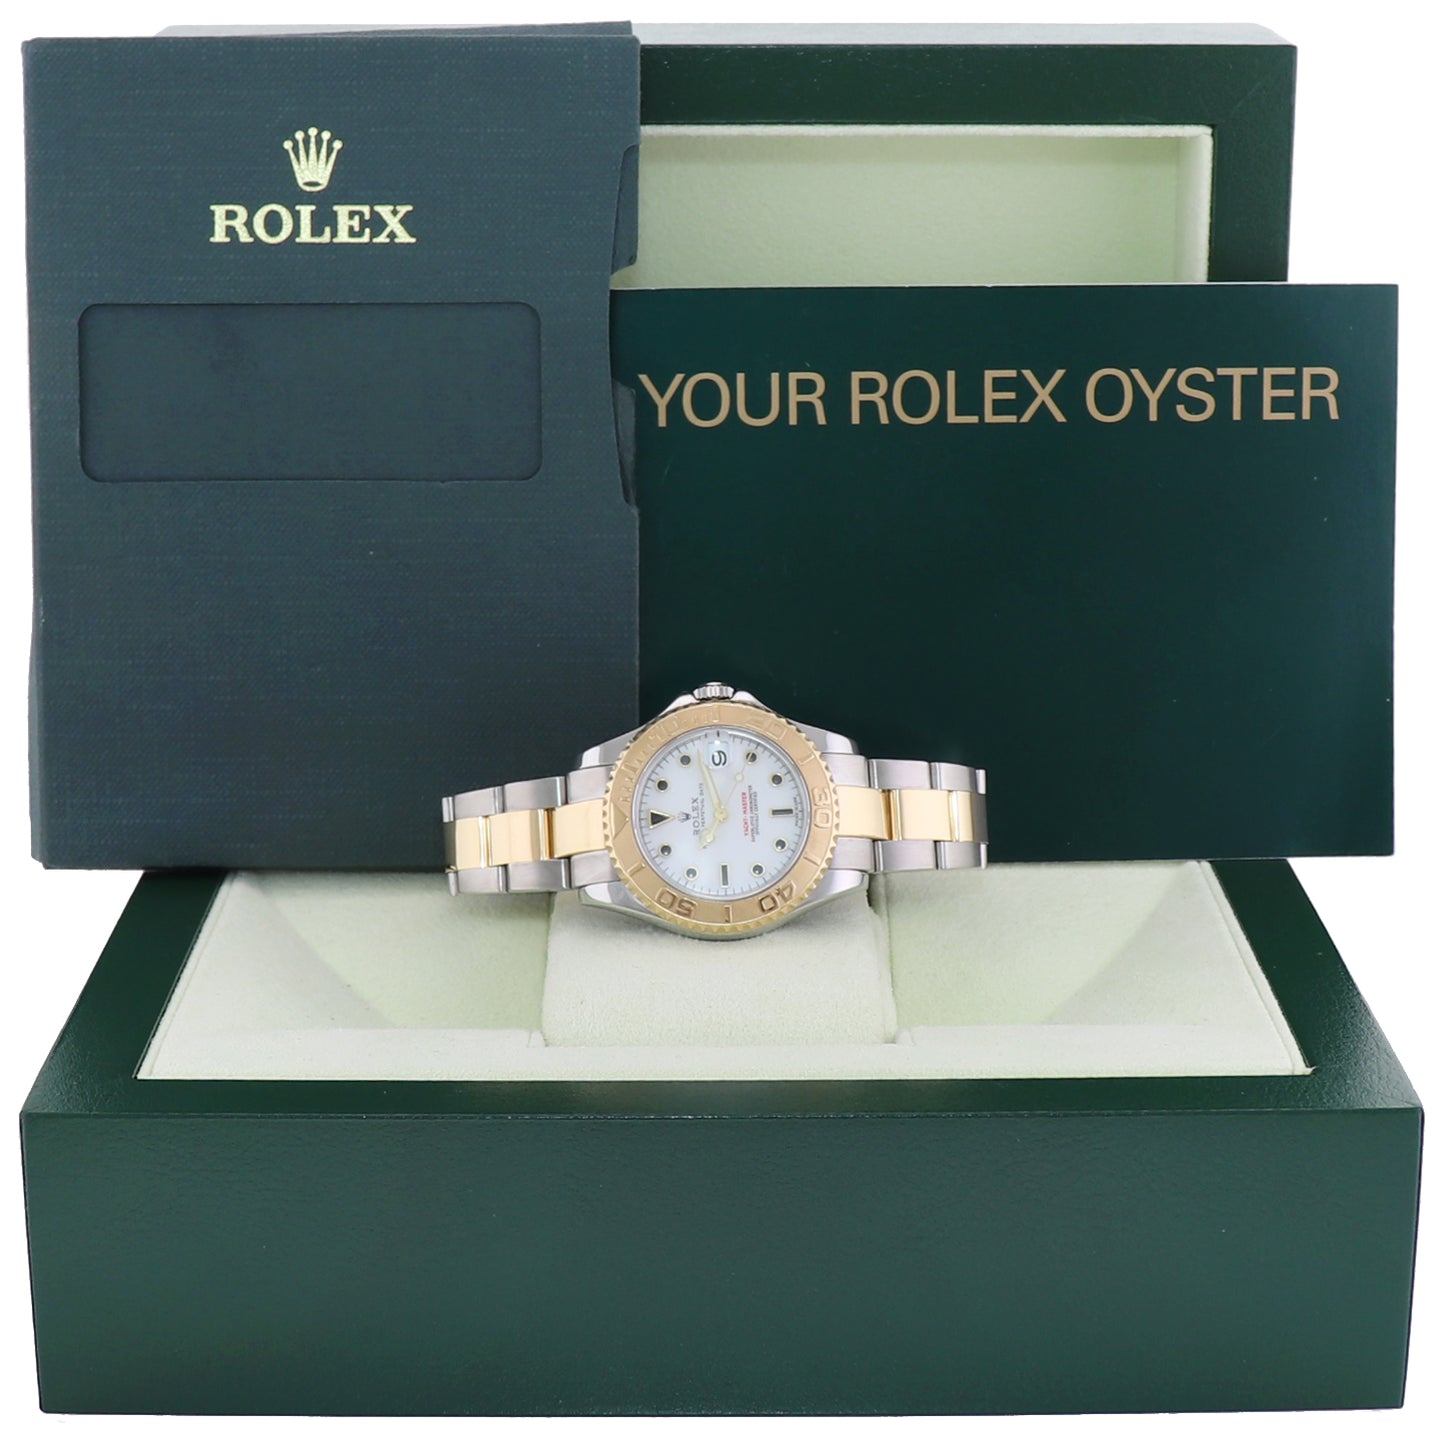 MINT Ladies Rolex Yacht-Master 68623 35mm Yellow Gold Two Tone White Midsize Watch